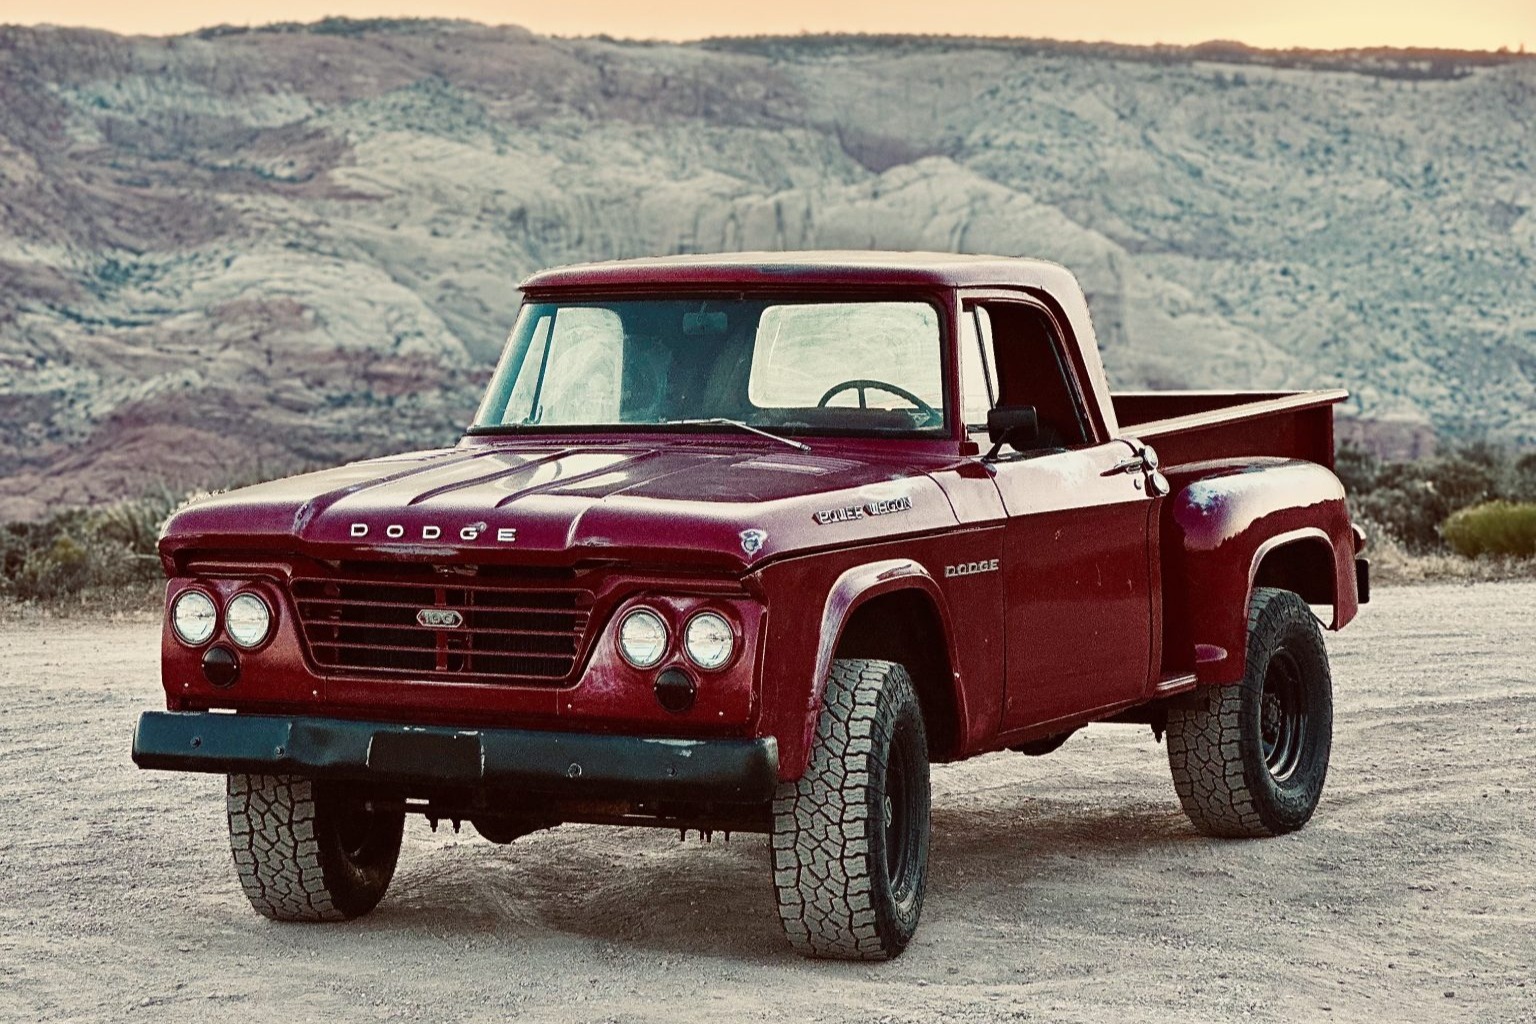 Used 1964 Dodge W100 Power Wagon 4-Speed Project Review